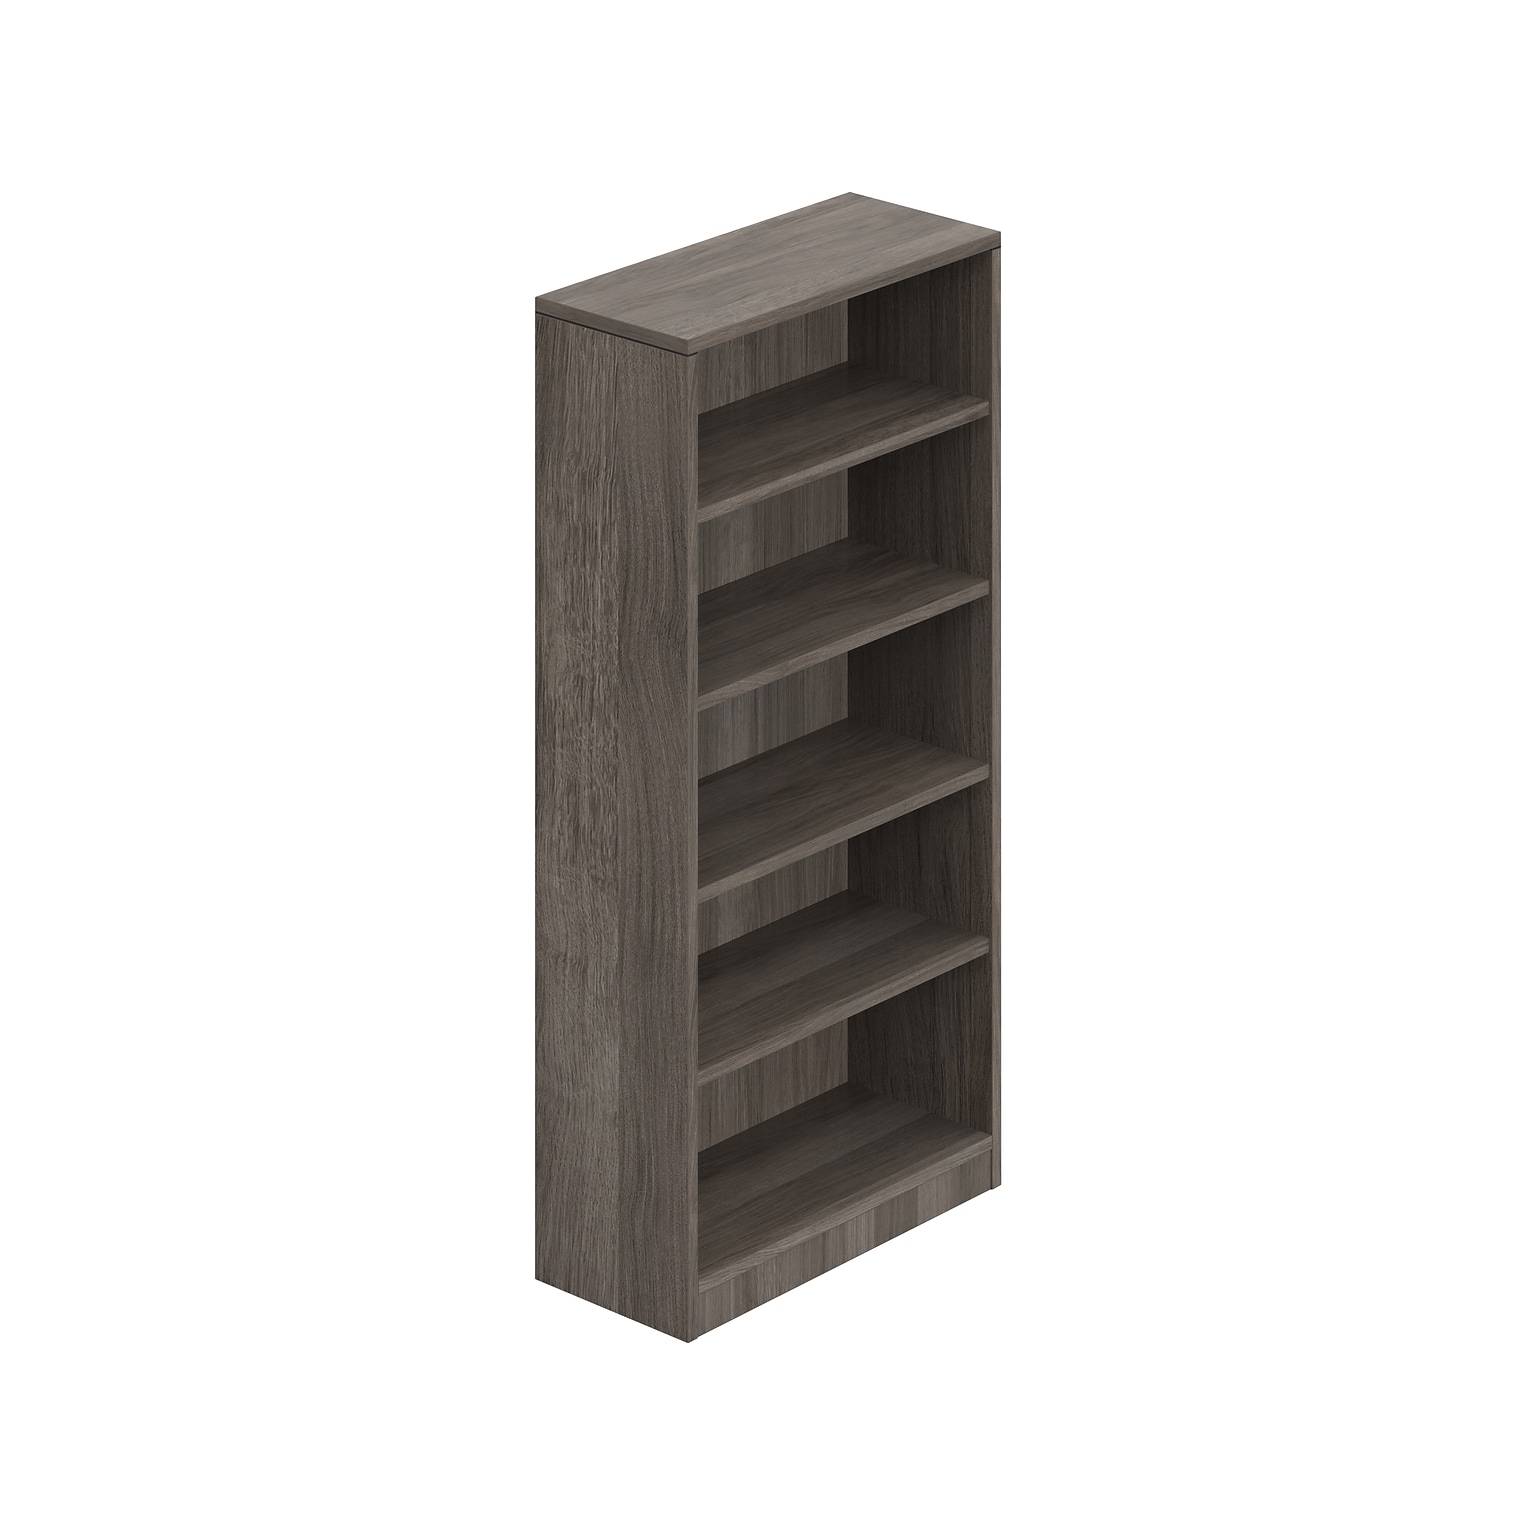 Offices to Go 4-Shelf 71H Bookcase, Artisan Gray (TDSL71BCAGL)